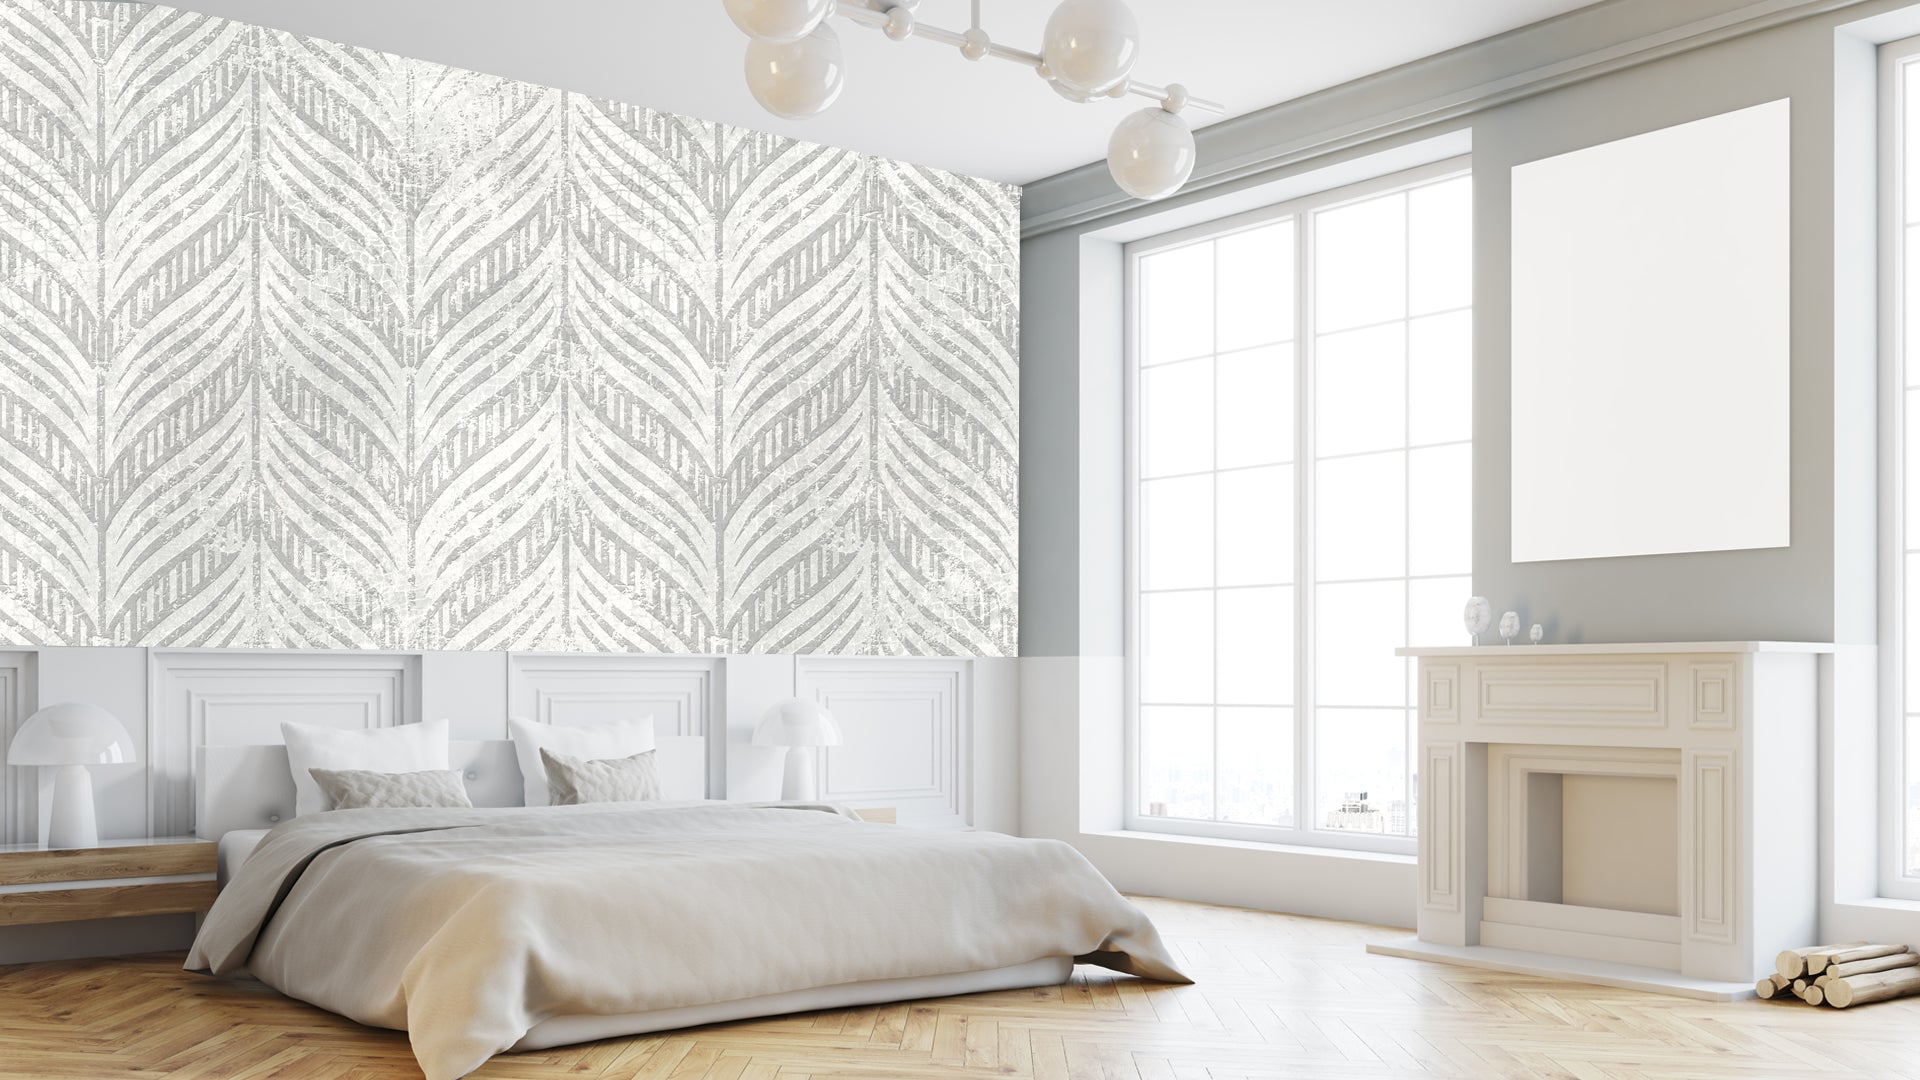 Wallcoverings & Murals for Master Bedroom by Walloverhaul